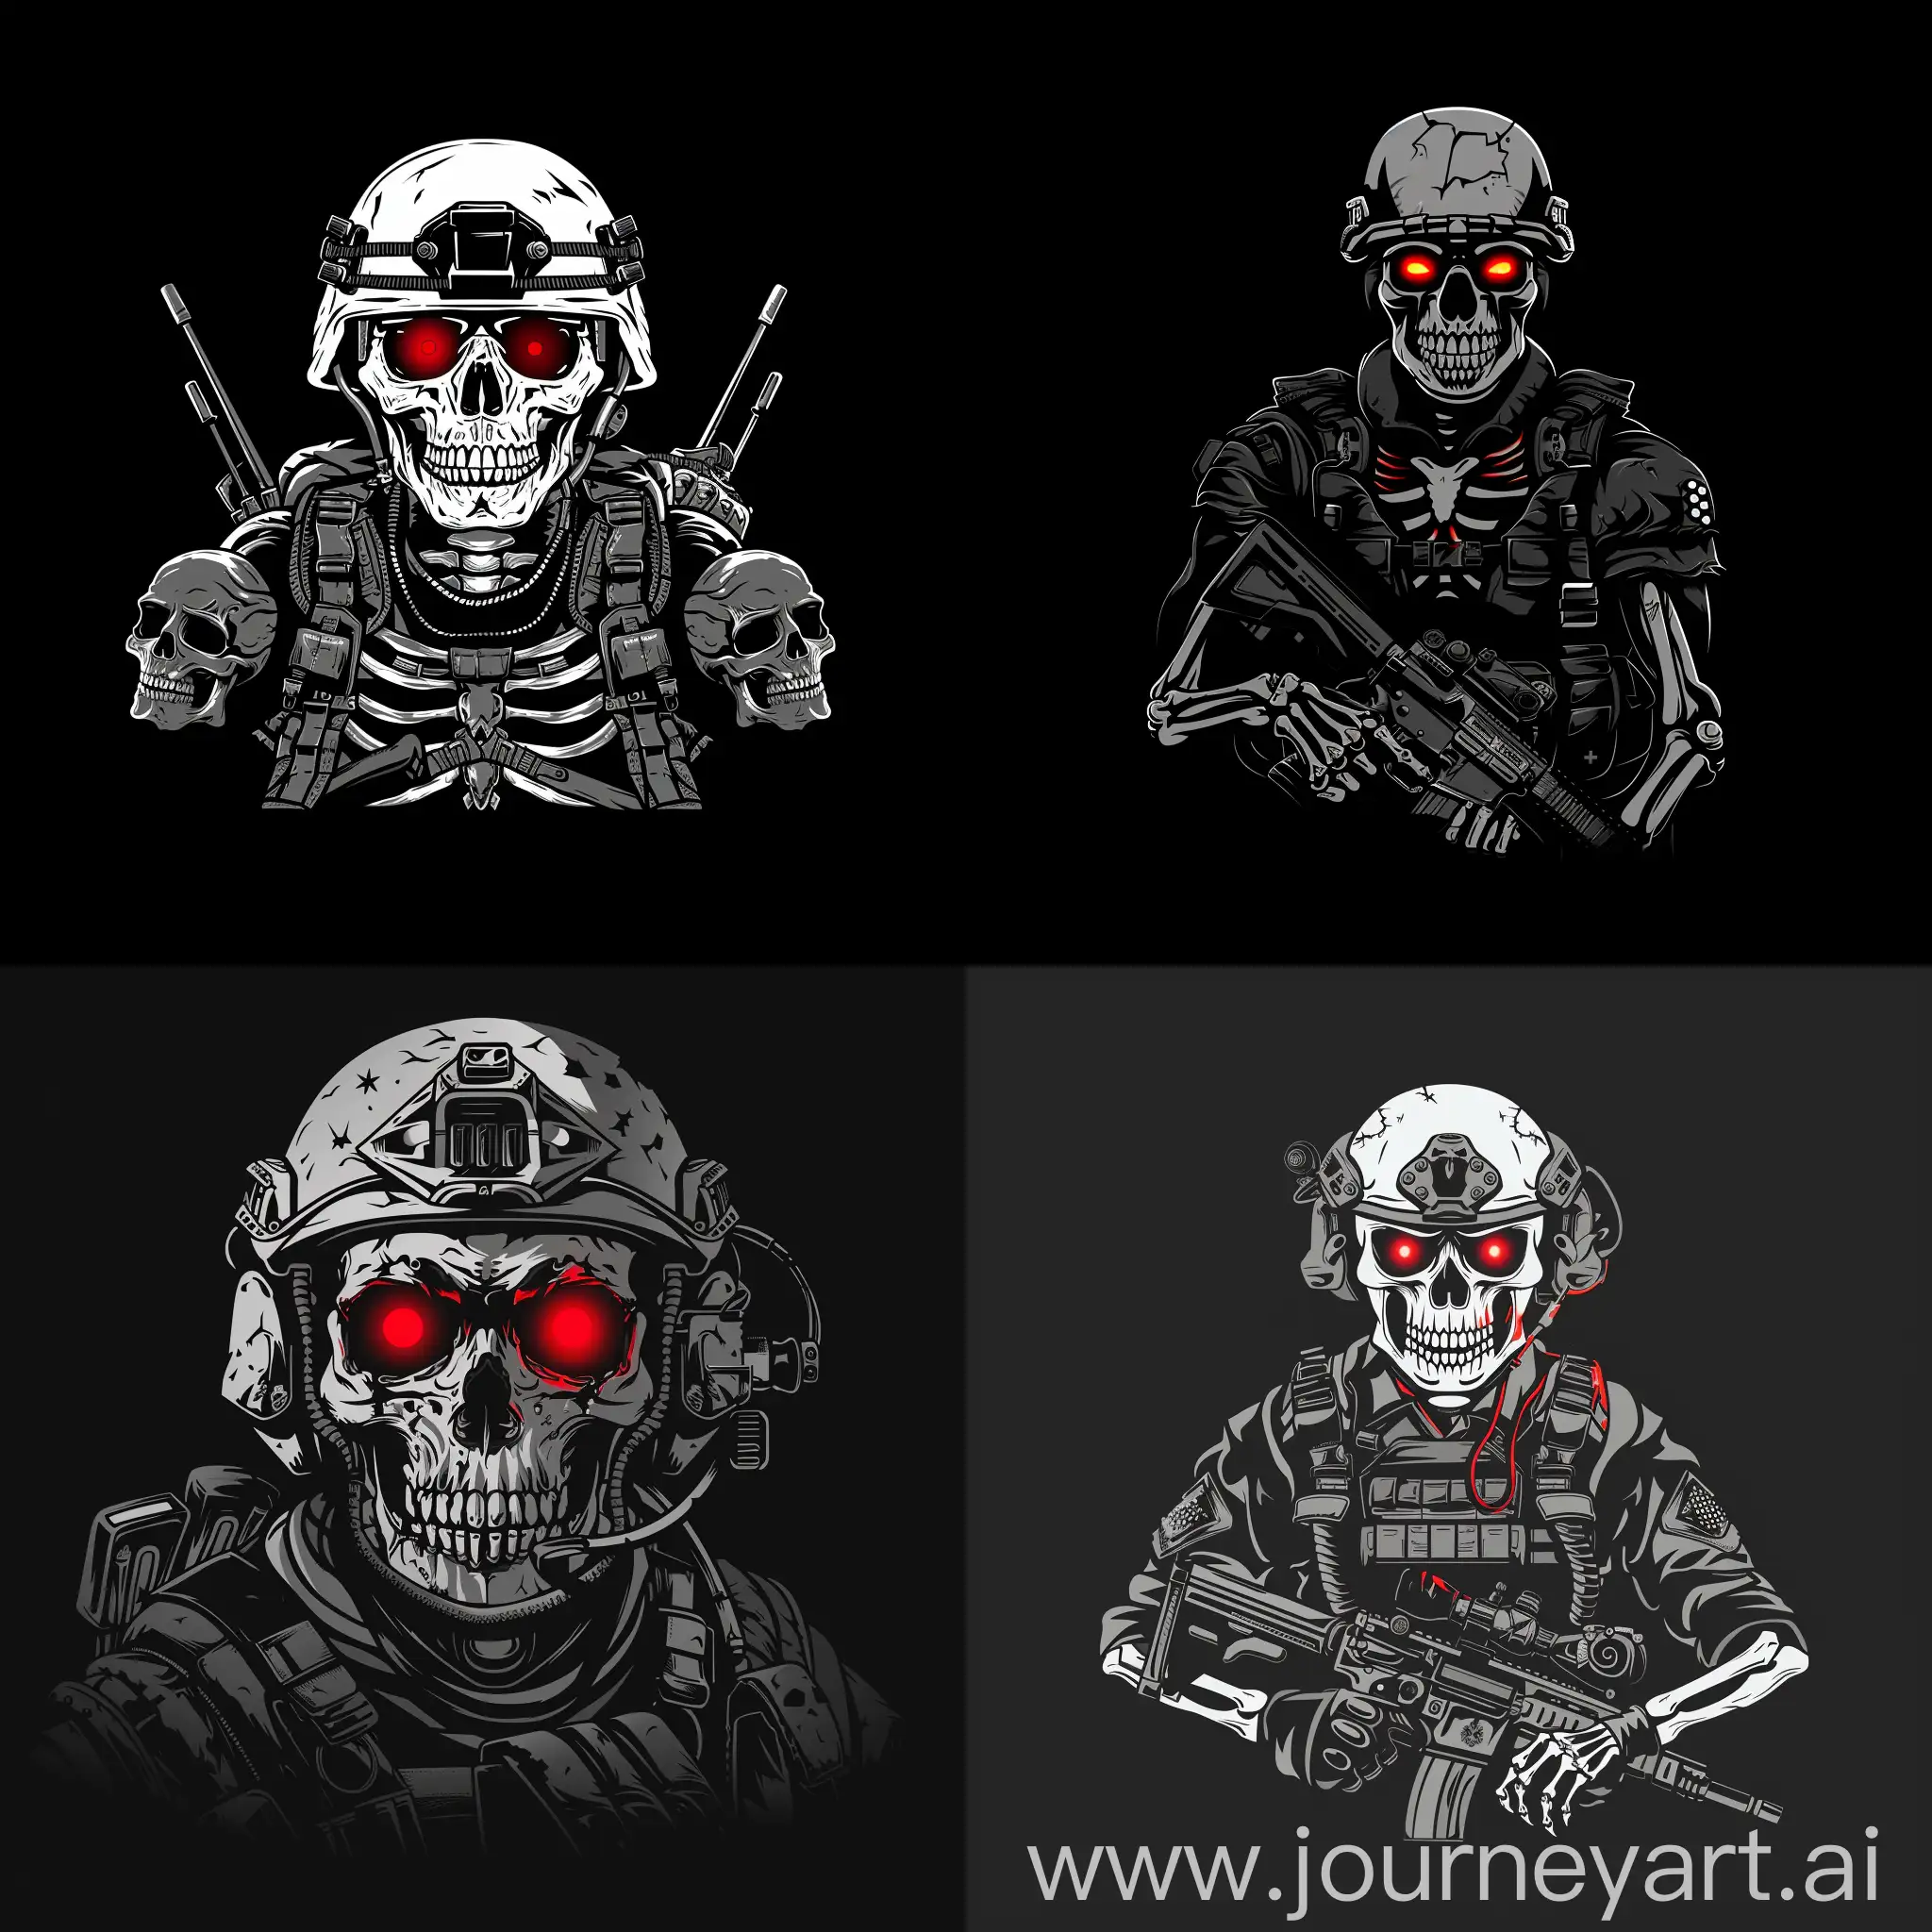 5 undead soldier look like a skeleton with modern military equipment, logo, minimalism, glowing red eyes, skulls, black and white, black background